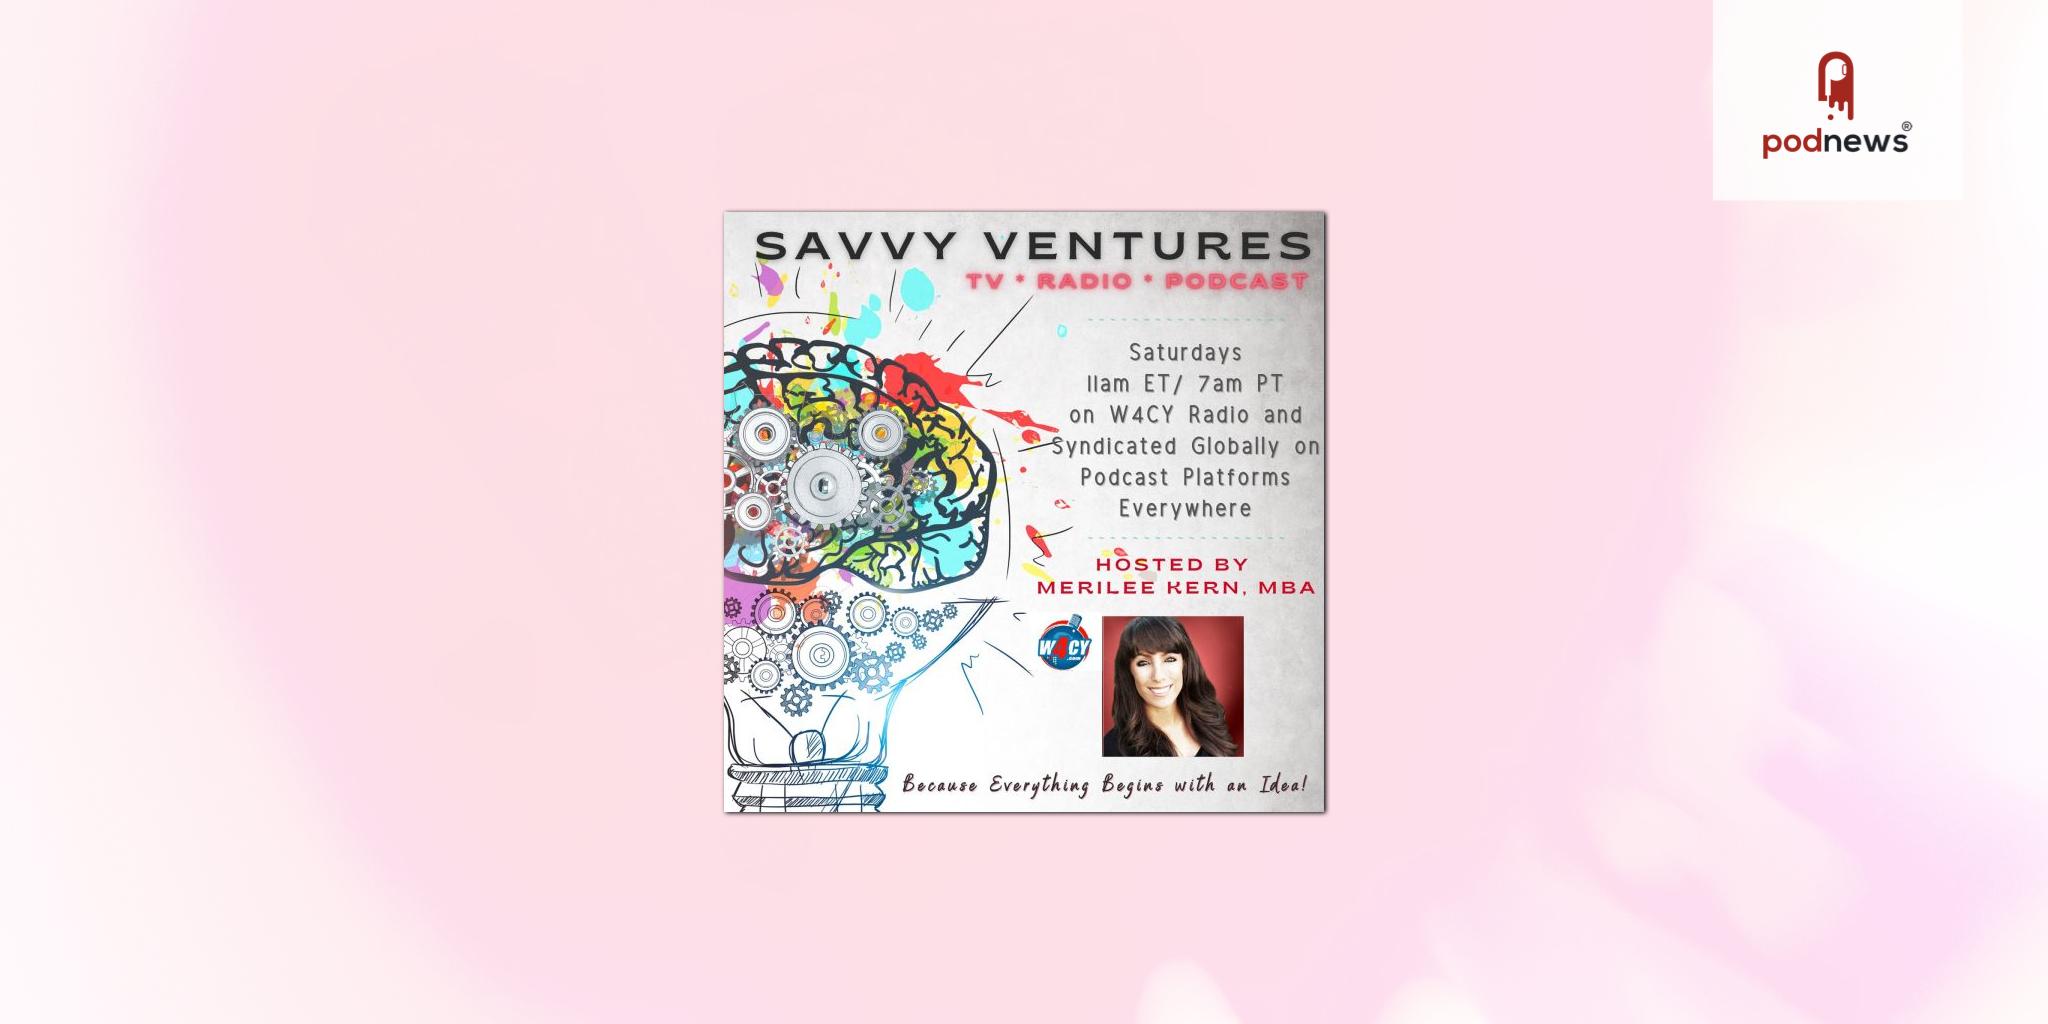 Savvy Ventures Global Podcast and Radio Show Launches